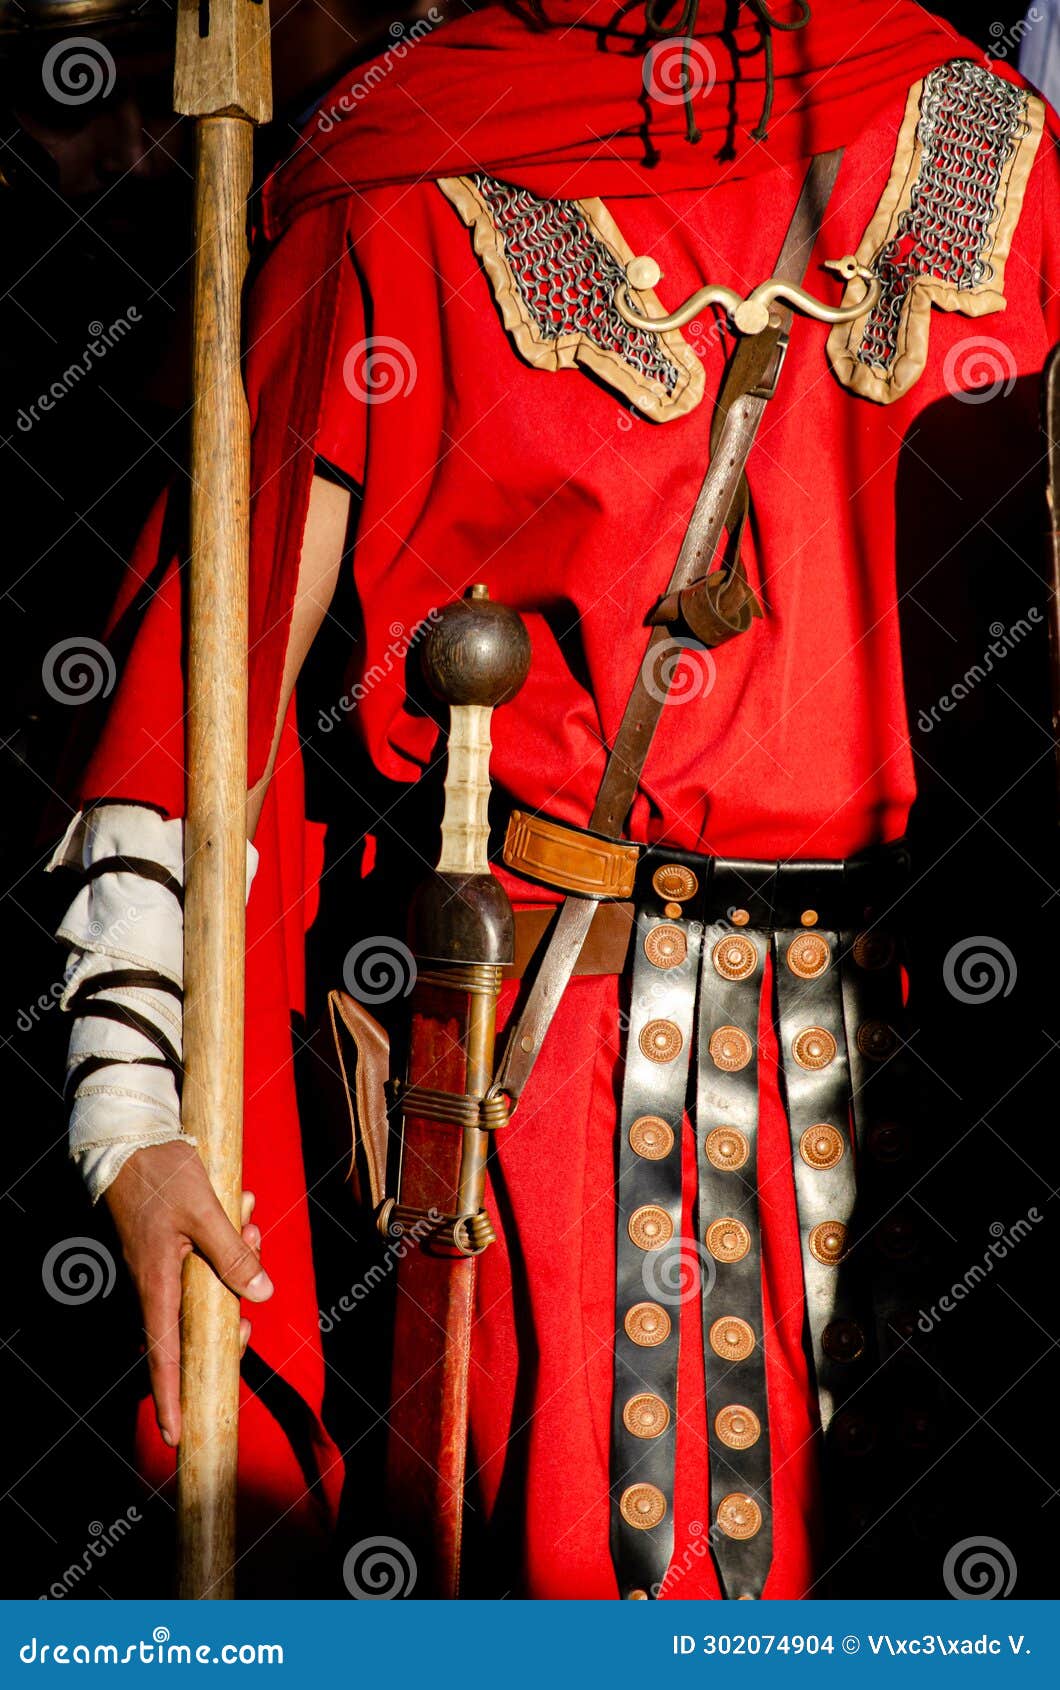 roman legionary at a historical reenactment event. festa dos povos. chaves, north of portugal